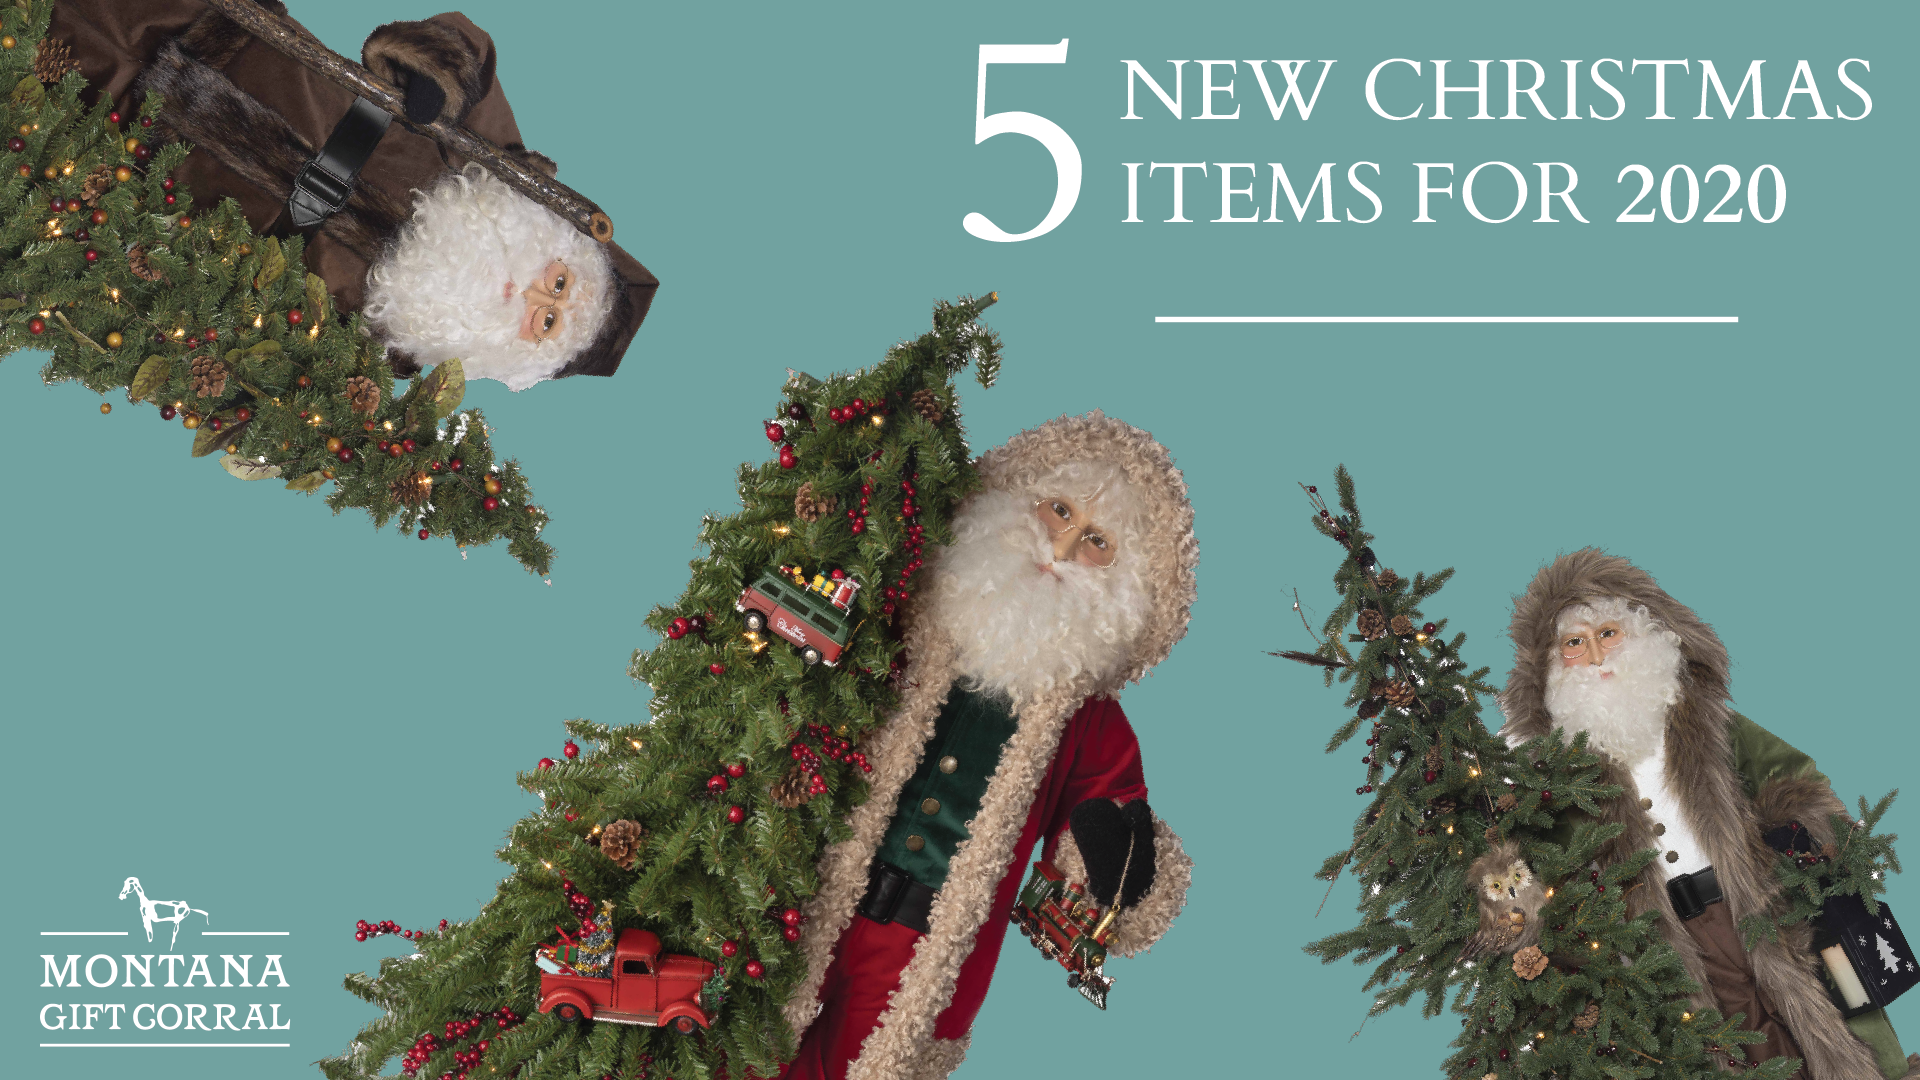 5 New Christmas Items for 2020